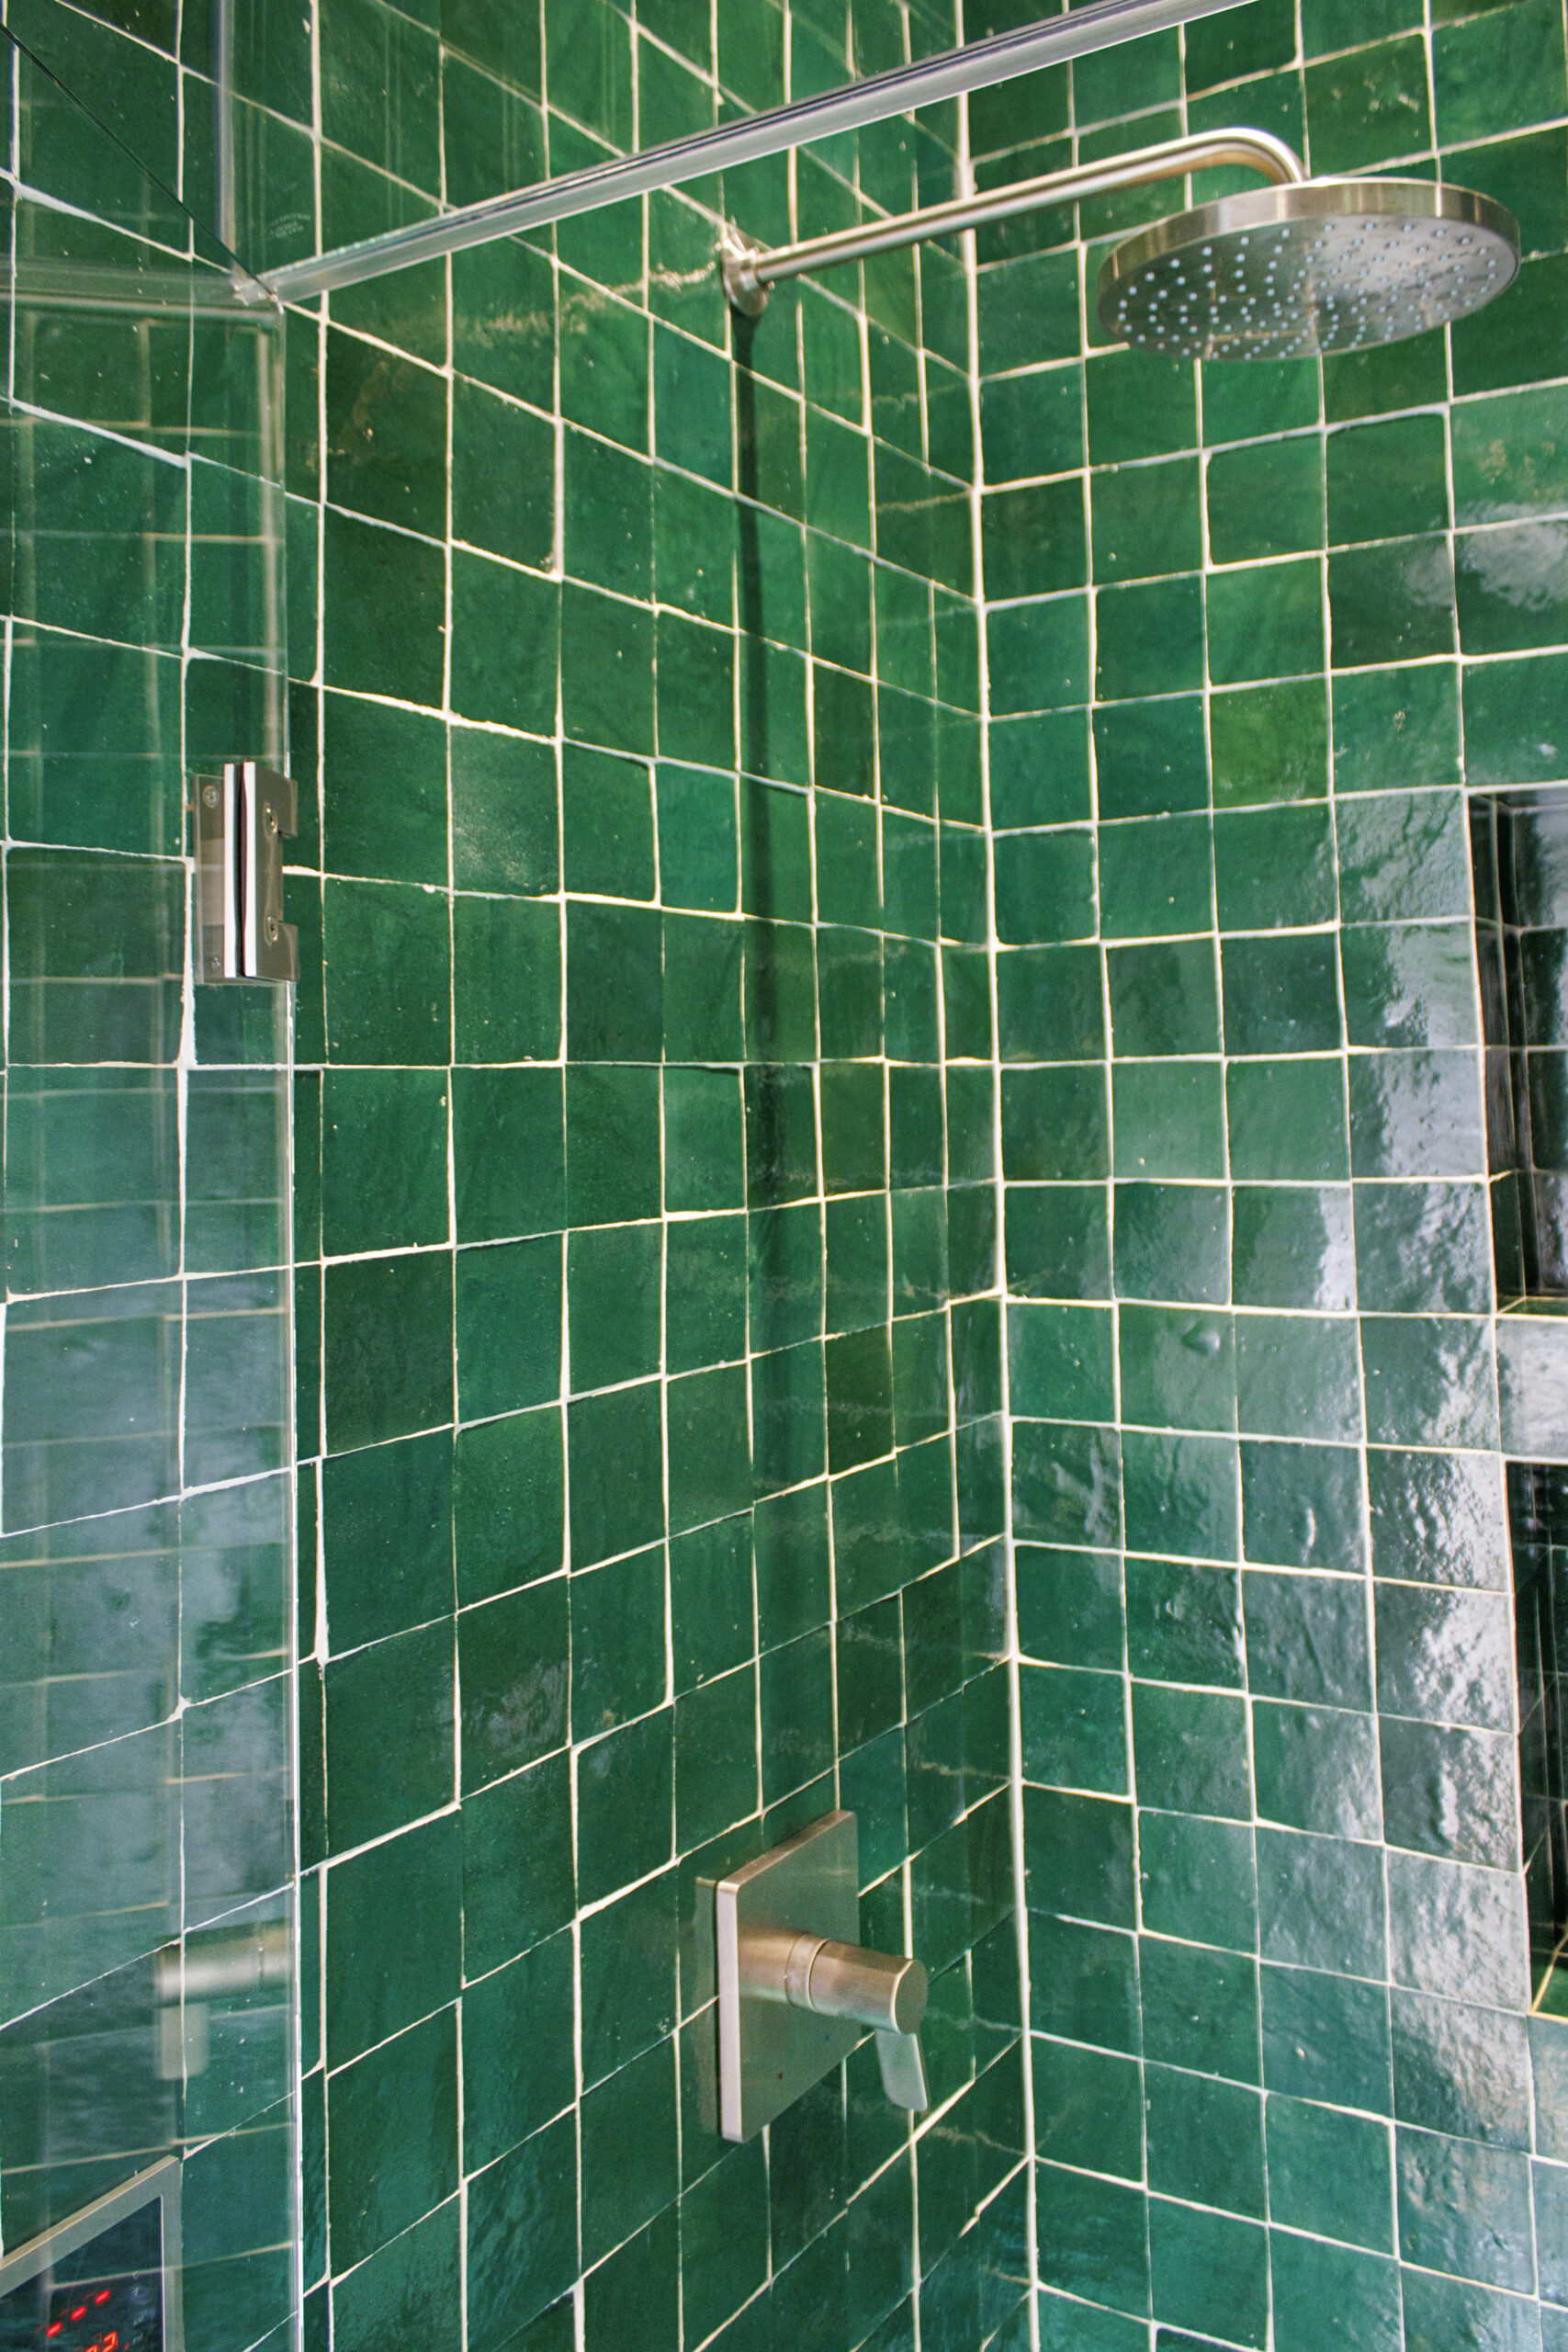 The emerald green tile